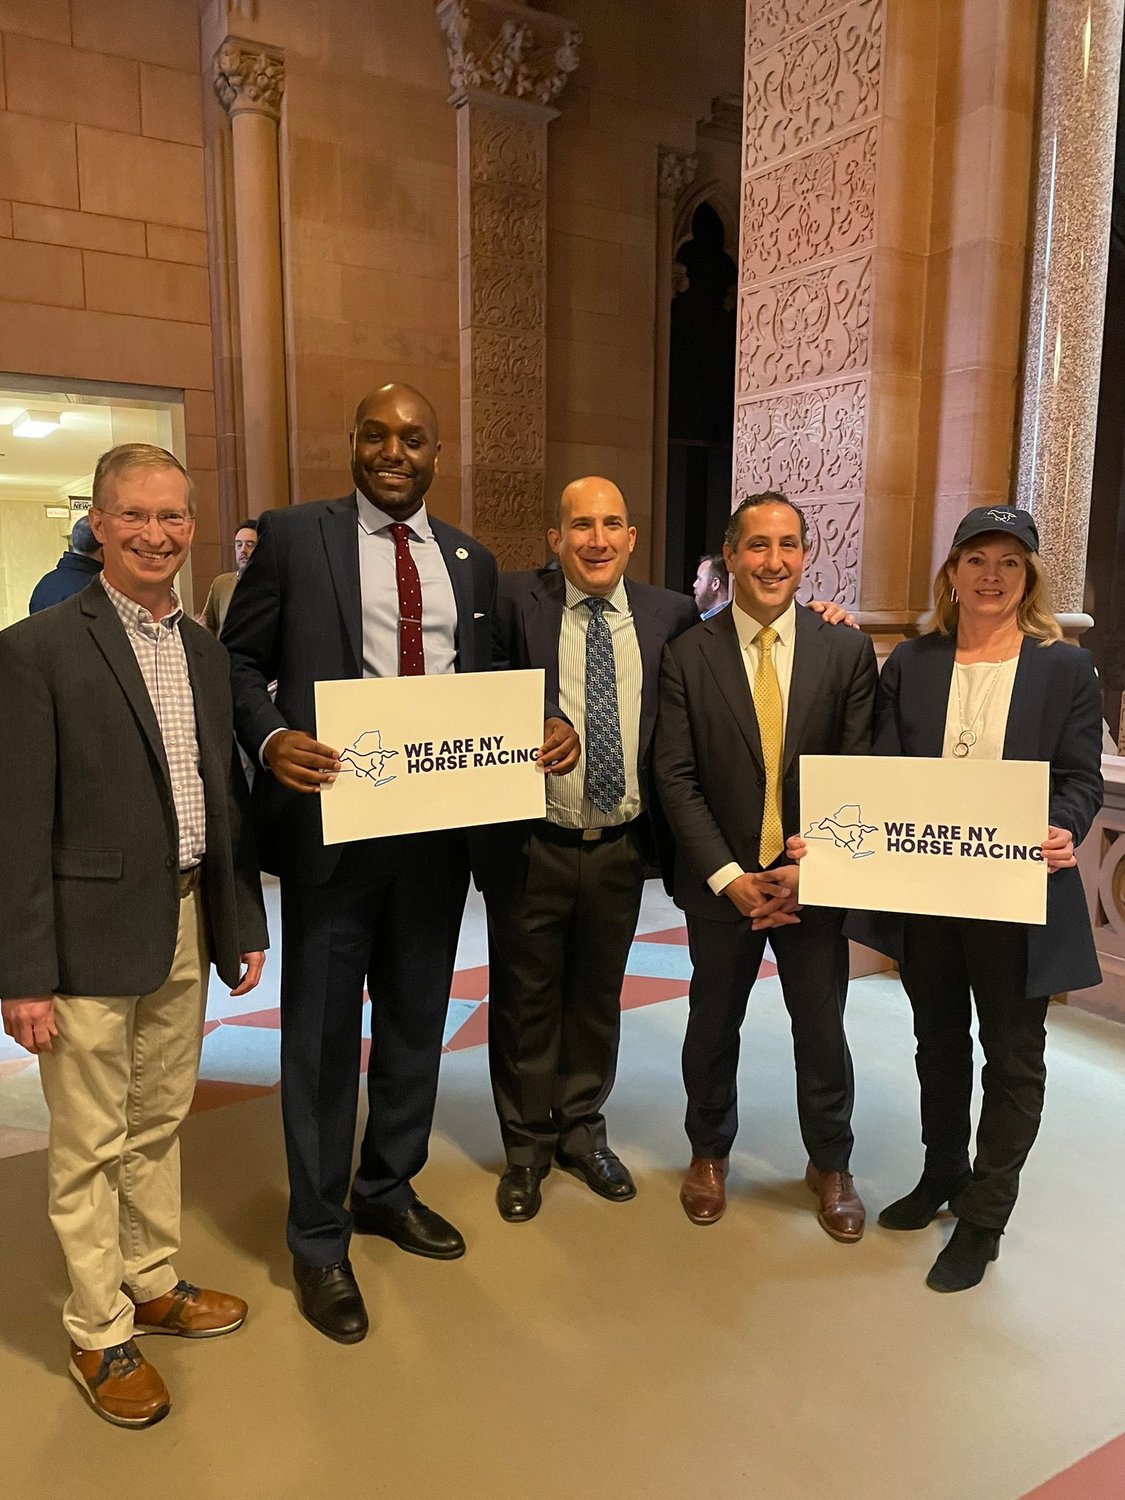 Todd Shimkus, left, of the Saratoga County Chamber of Commerce, Naija Thompson of New York Thoroughbred Breeders, Joe Appelbaum of the New York Thoroughbred Horse Association, Jeff Cannizzo of the New York Racing Association and Heather Mulligan of the Business Council of New York travelled up to Albany to voice their support for the Belmont modernization project.